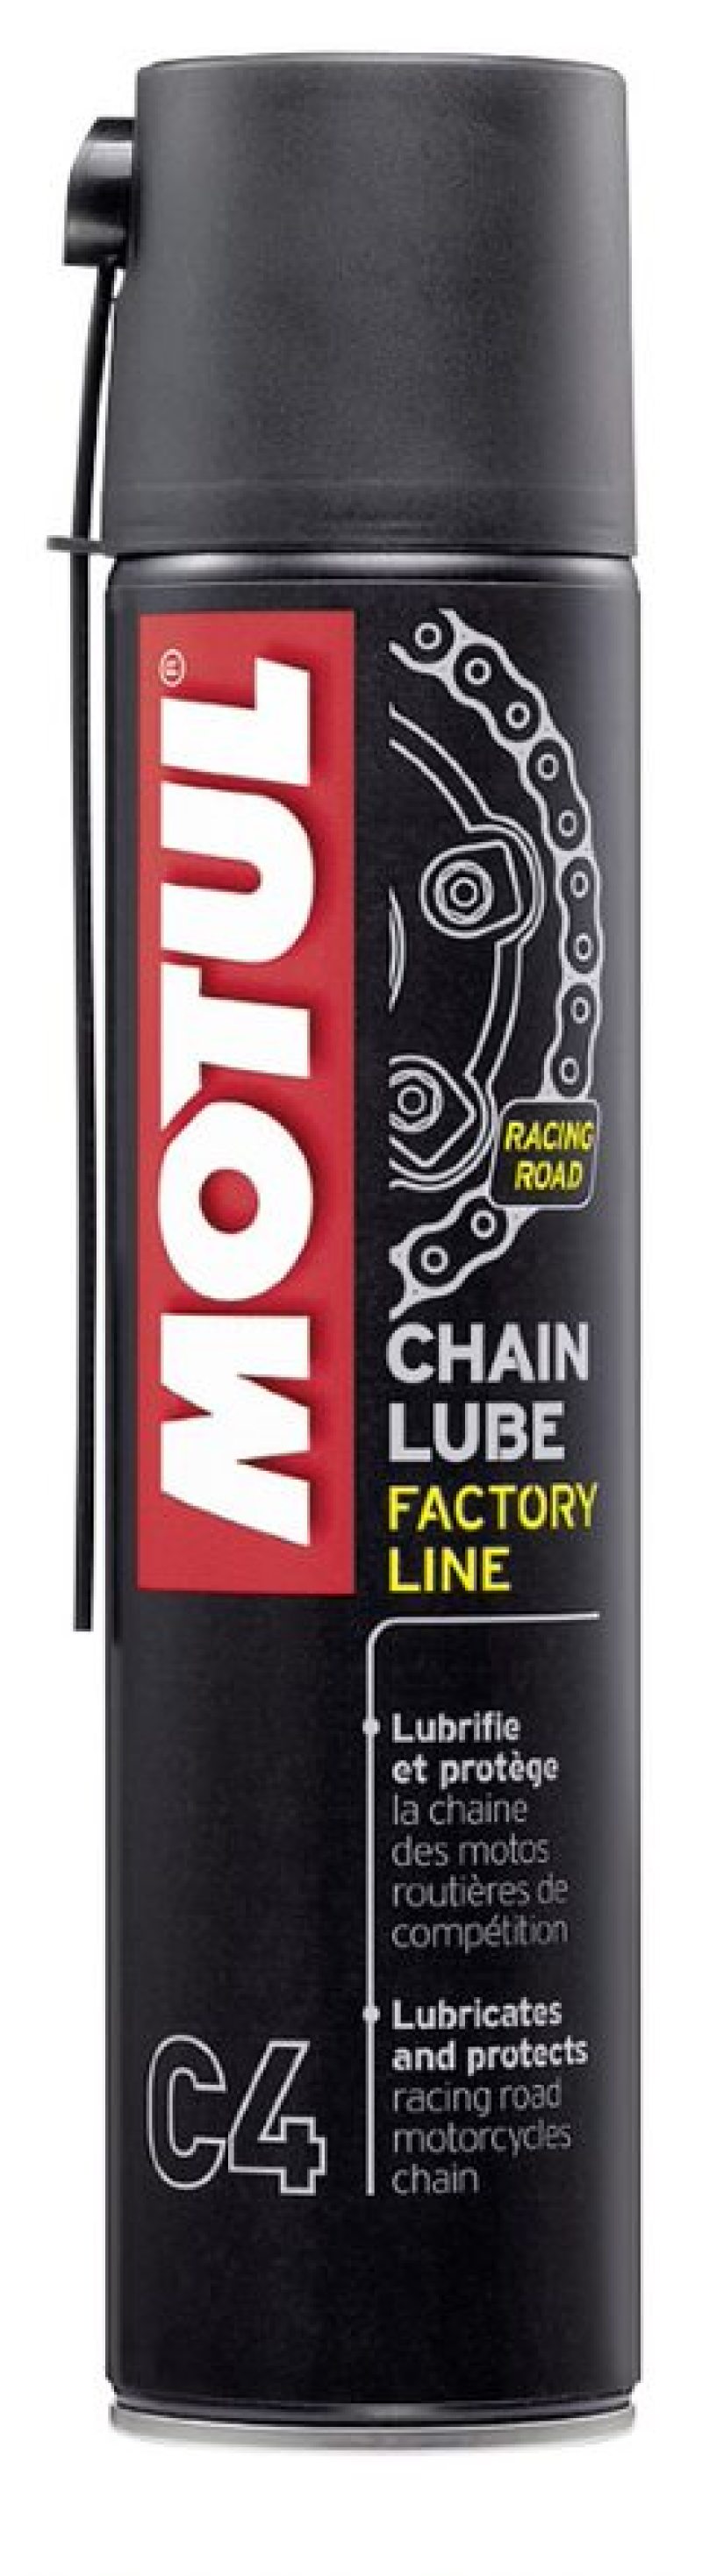 Motul .400L Cleaners C4 CHAIN LUBE FACTORY LINE - 103246